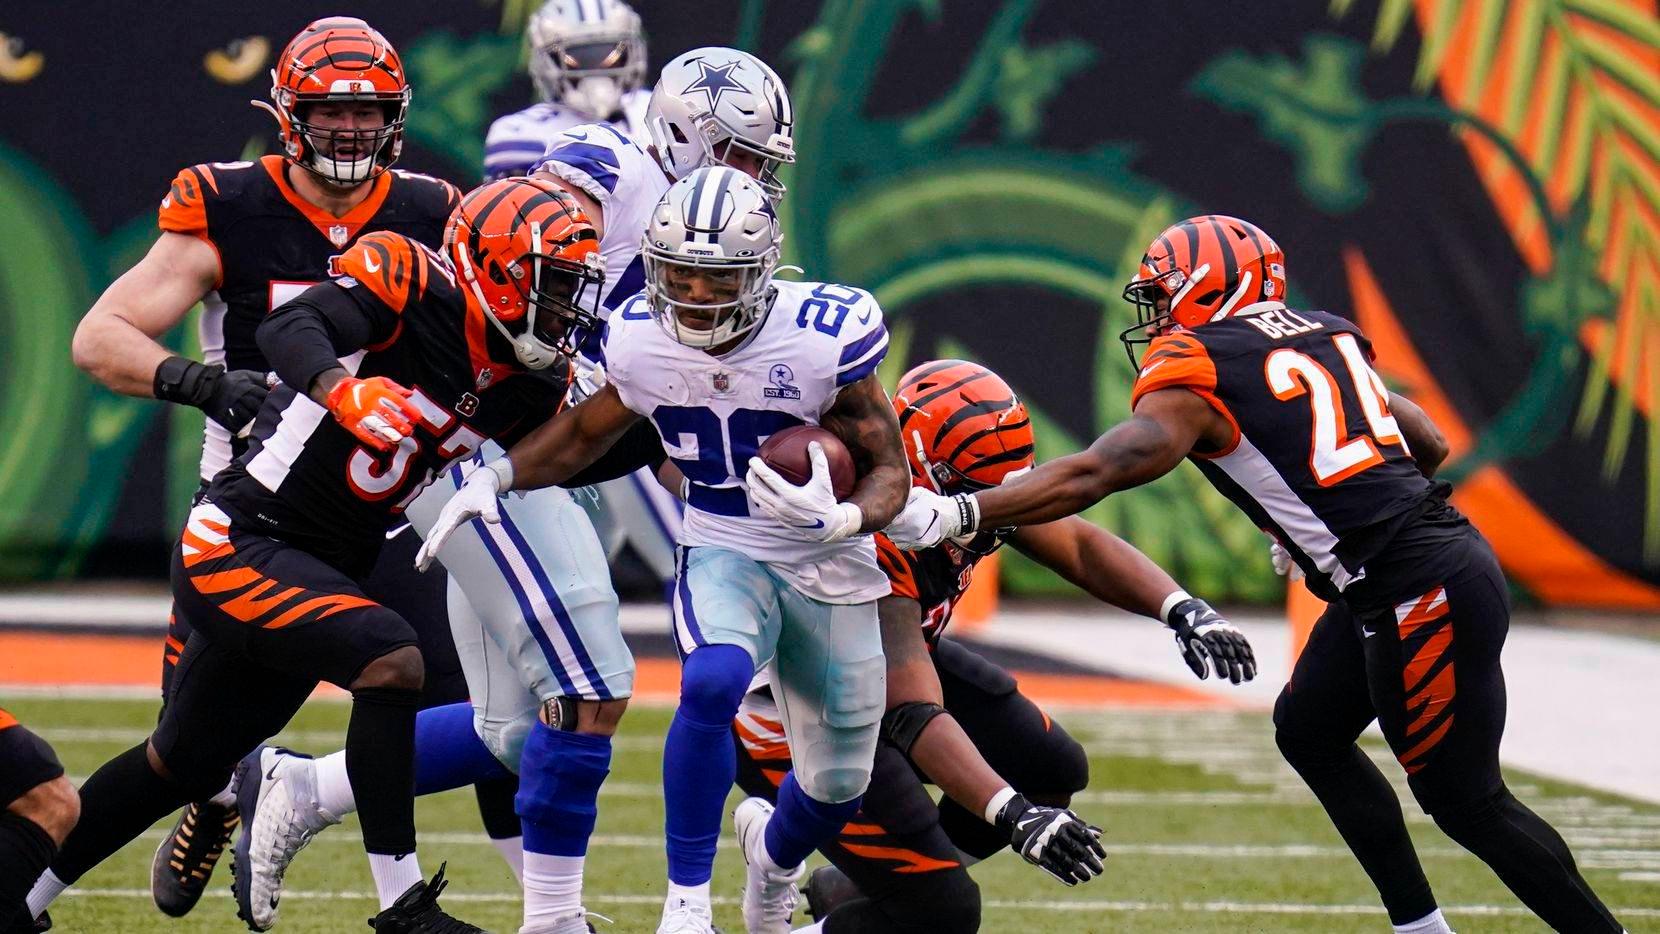 Bengals vs. Cowboys Week 2 Betting: Bengals in Good Position With Cowboys Missing Prescott